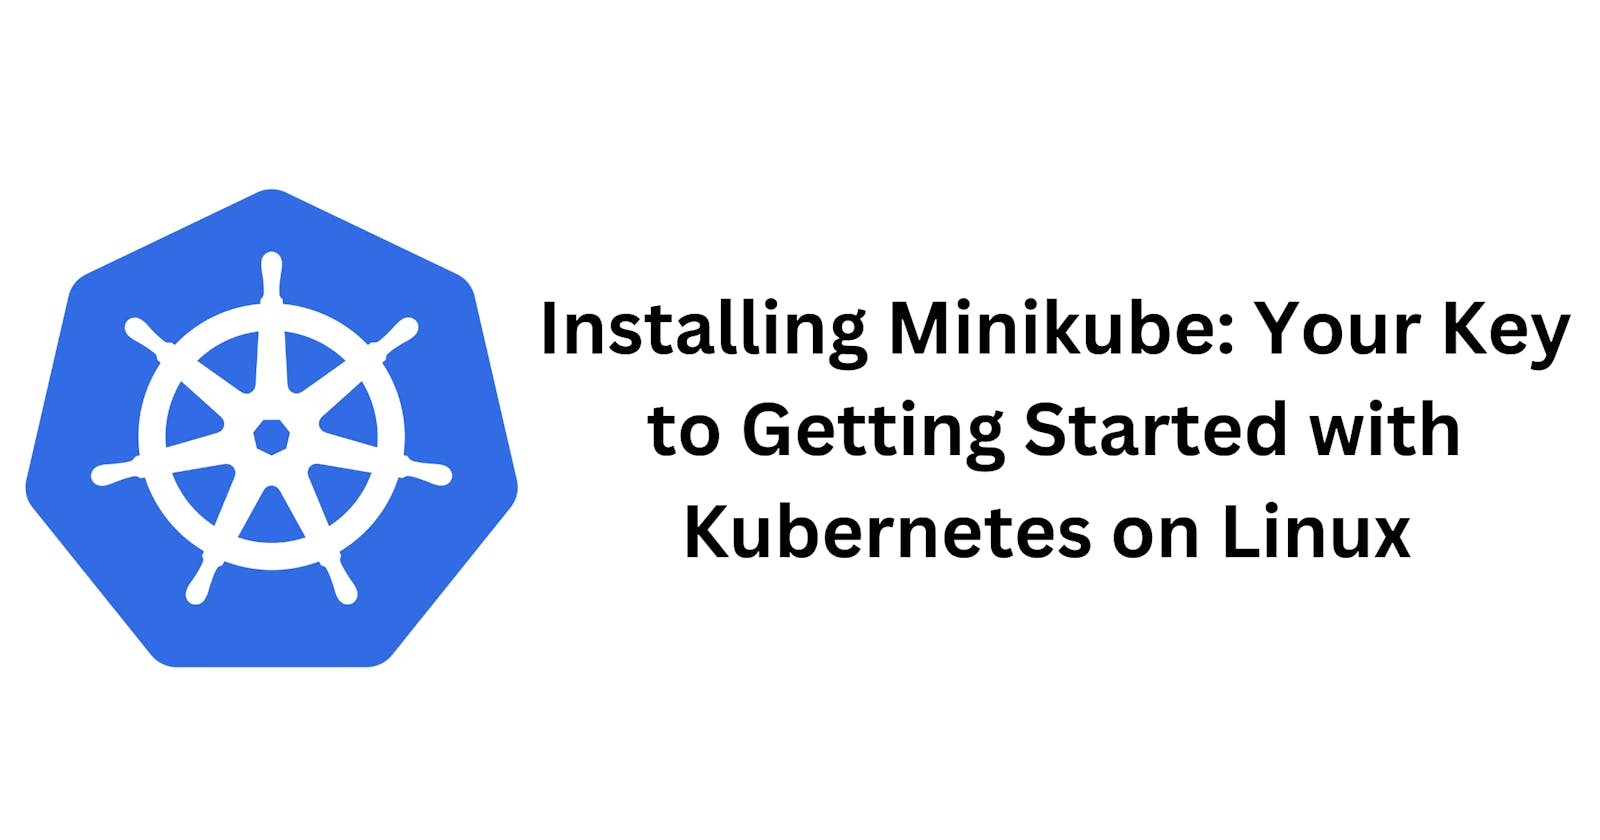 Installing Minikube: Your Key to Getting Started With Kubernetes on Linux